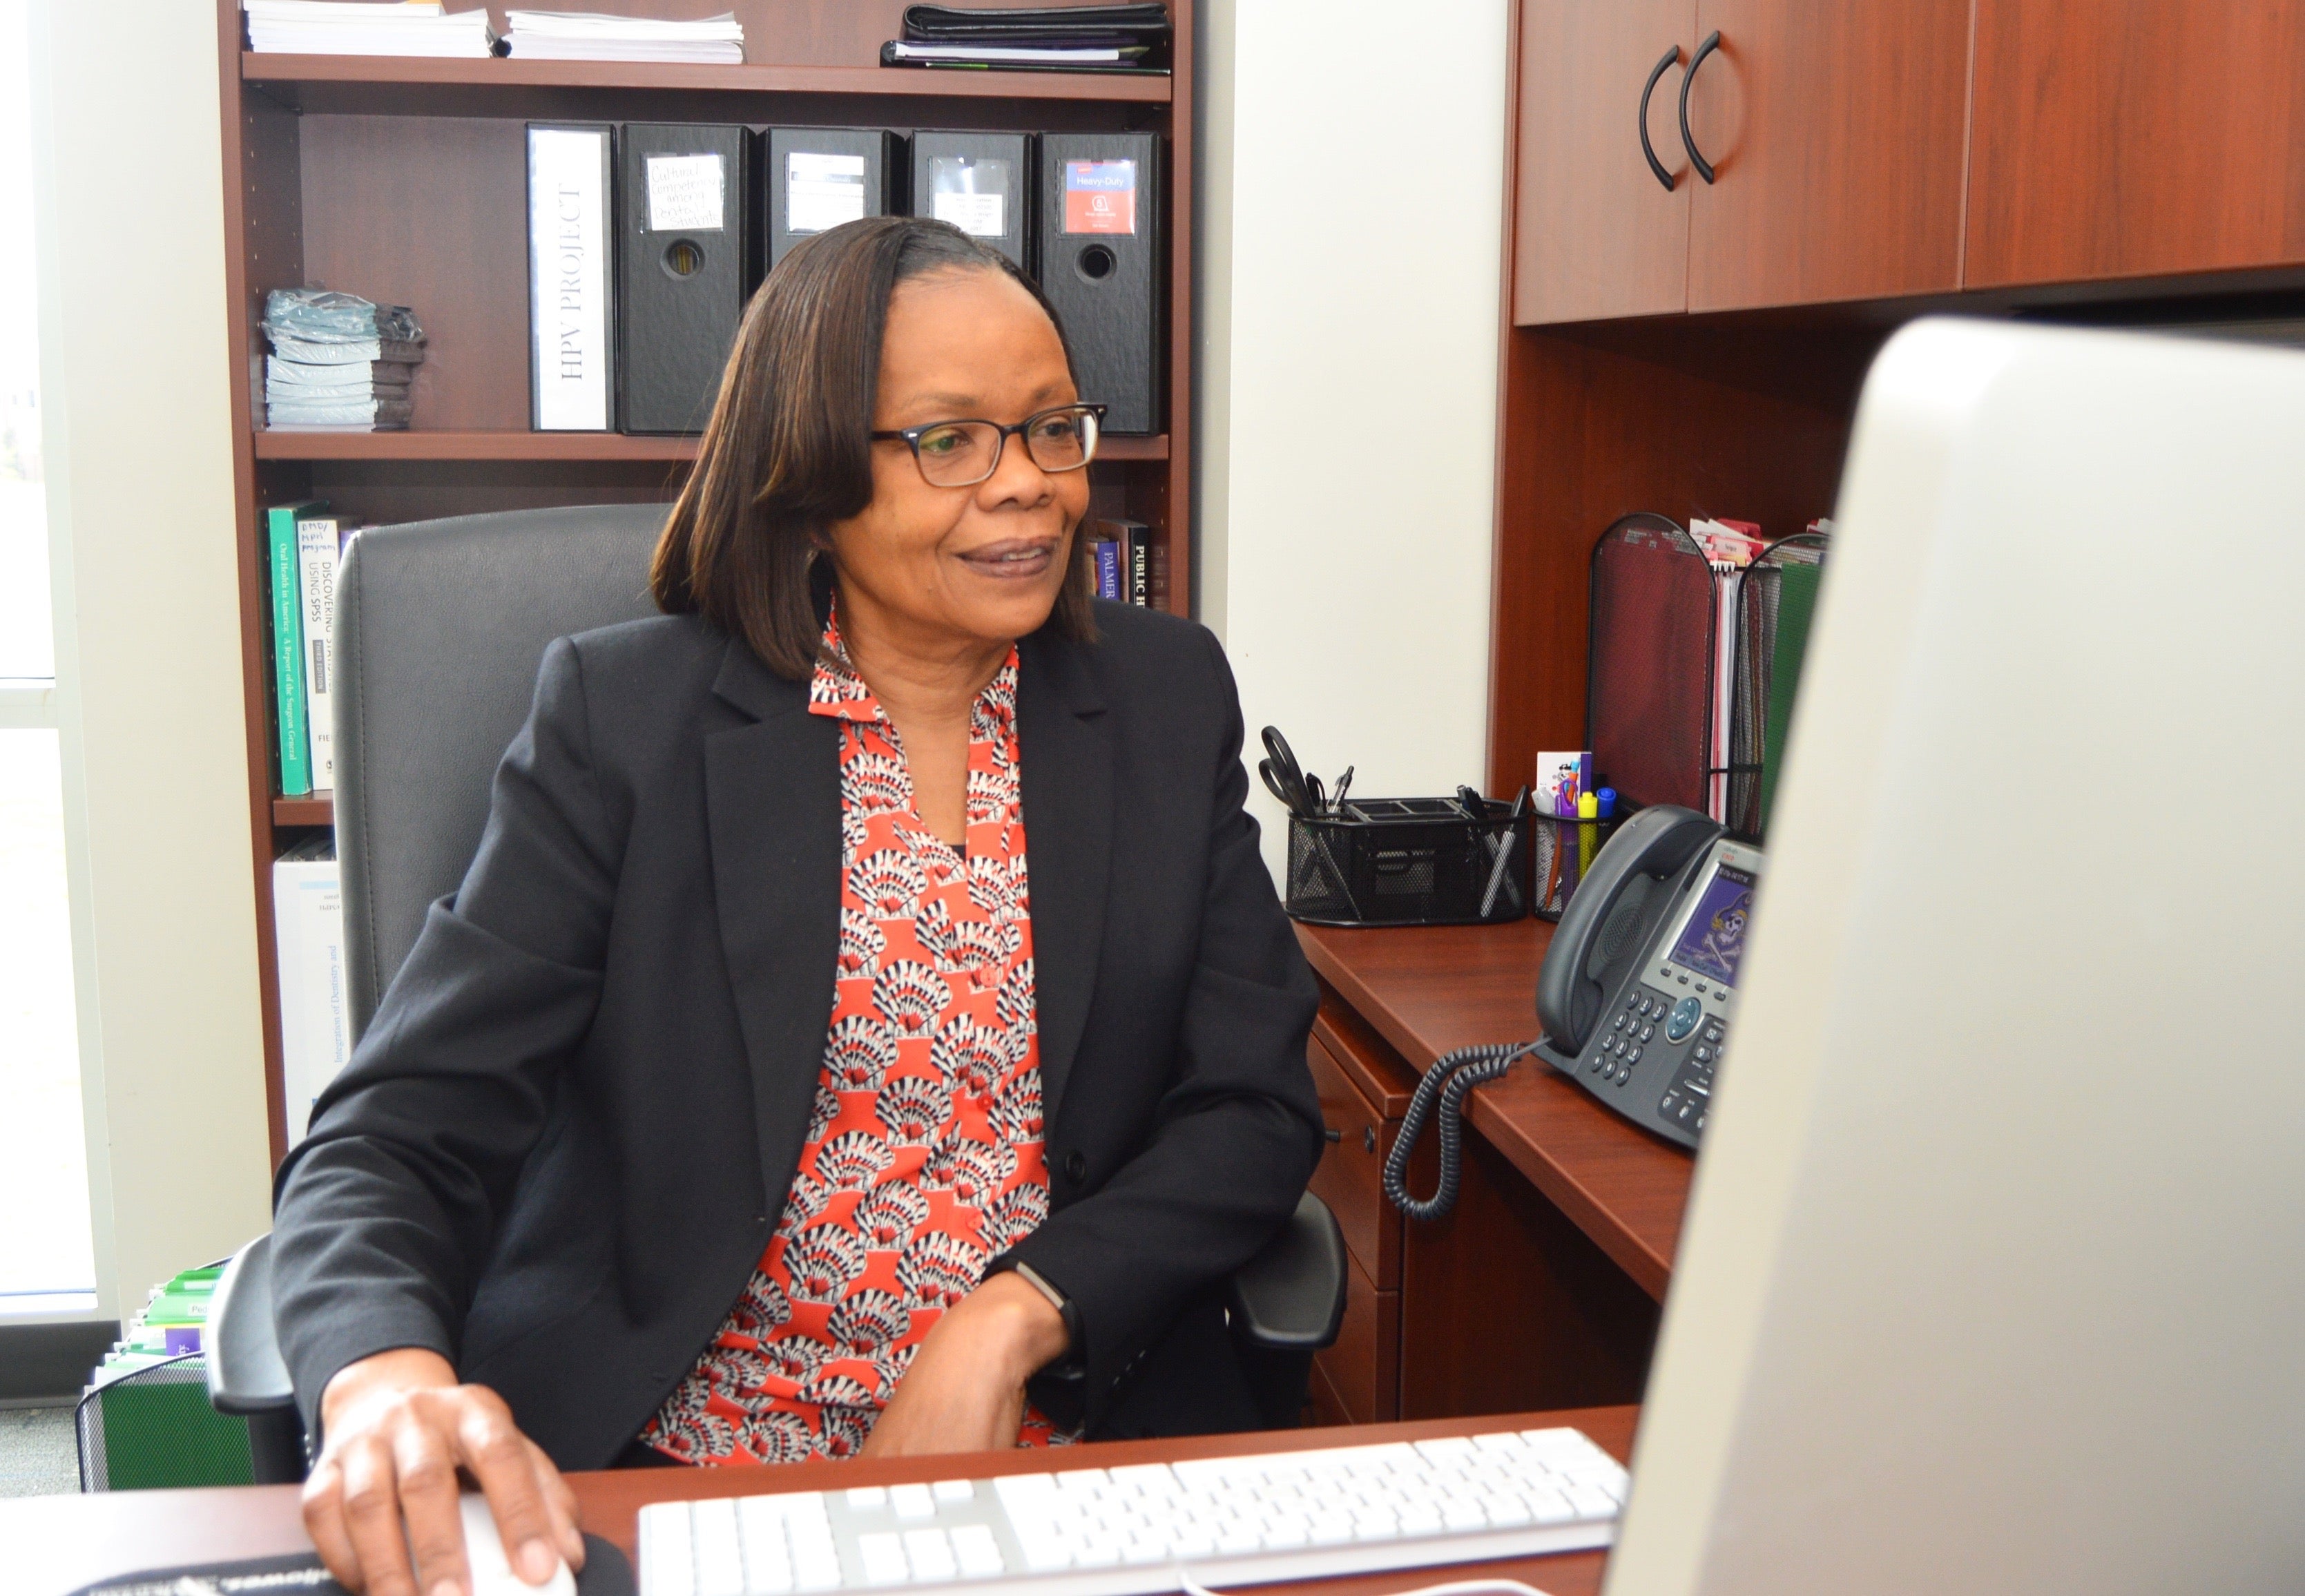 Dr. Wanda Wright is an assistant professor and division director of dental public health at the ECU School of Dental Medicine.